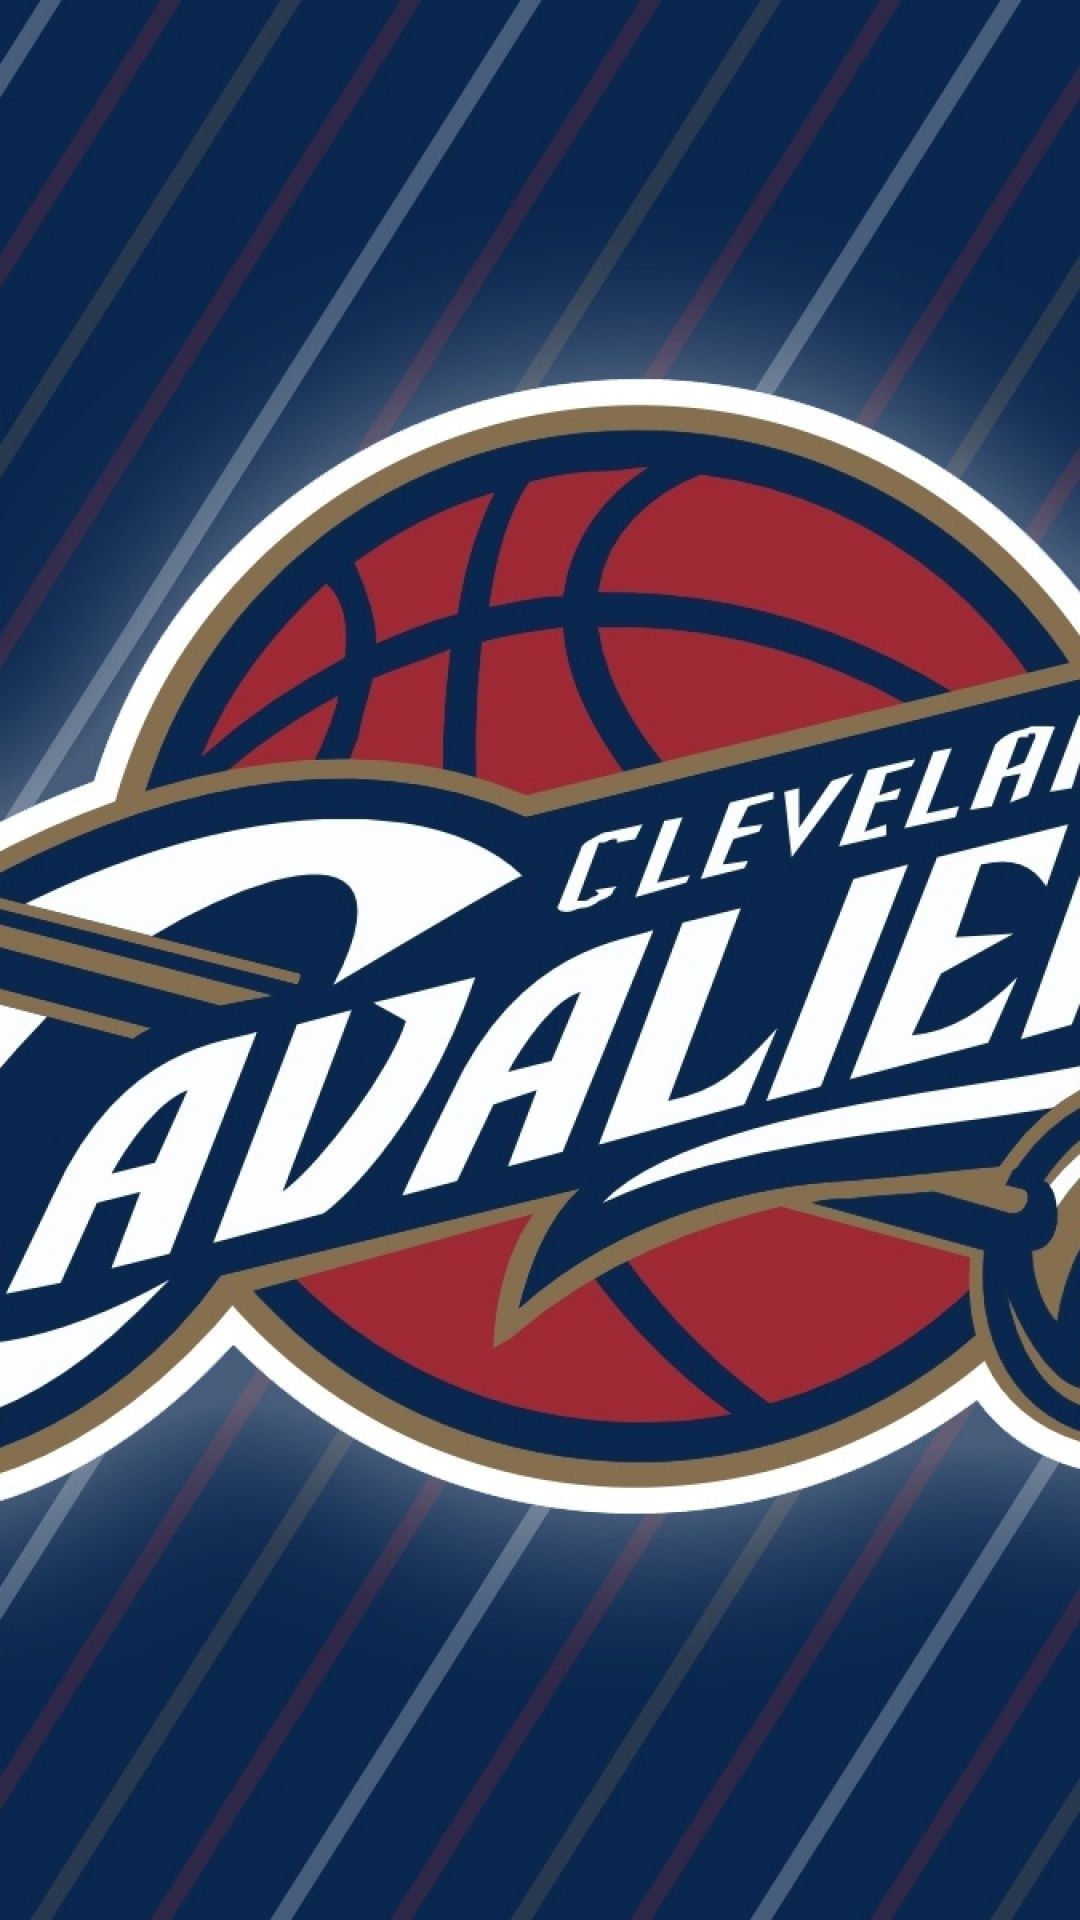 Cleveland Cavaliers S4 Wallpaper | ID: 25846